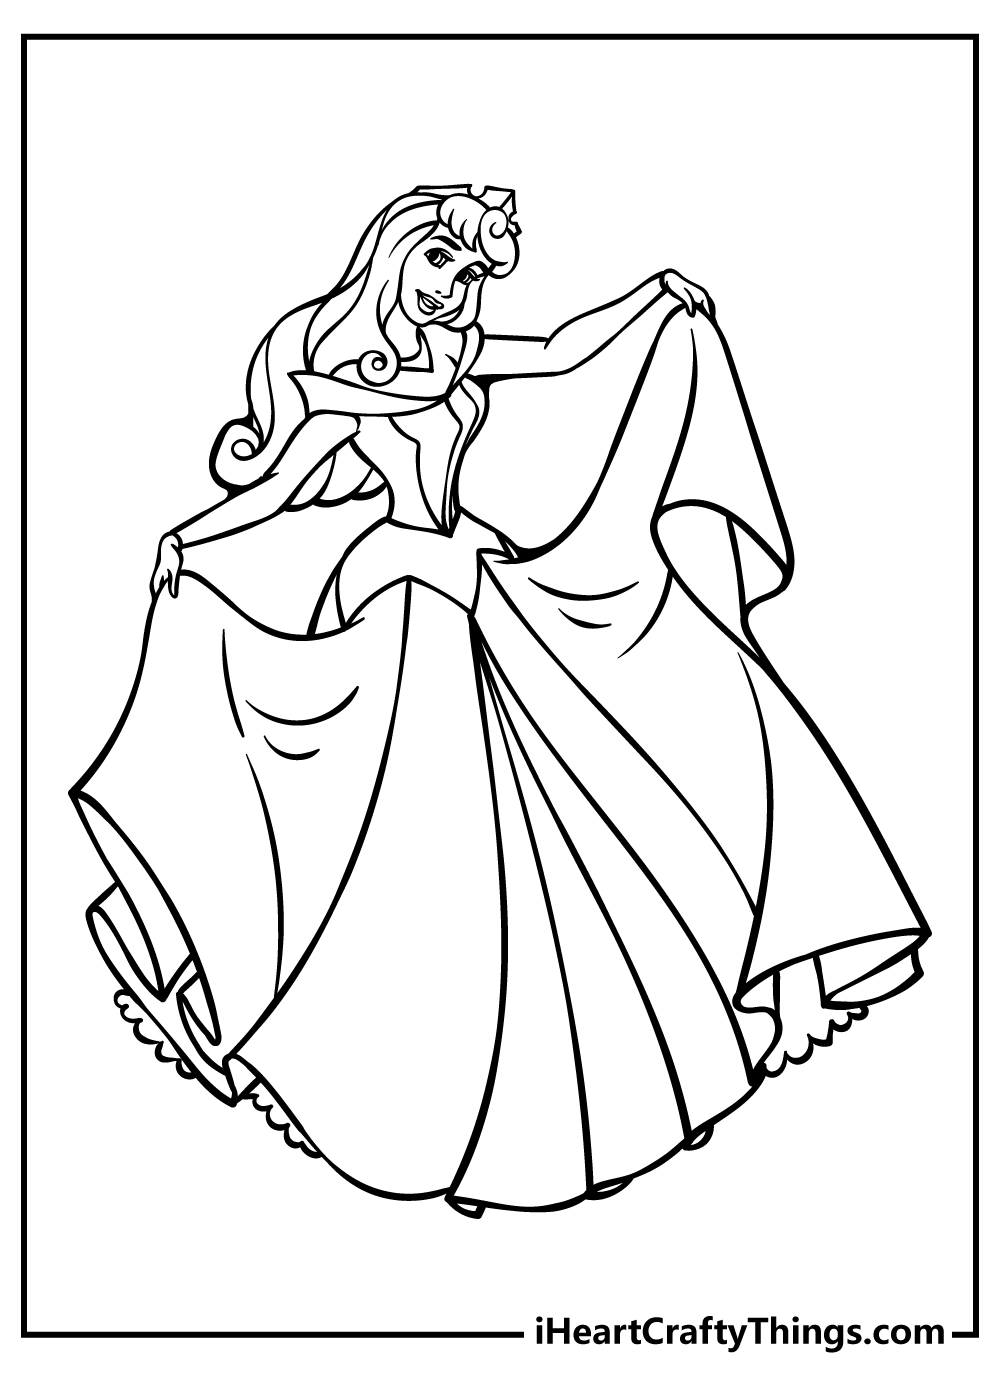 Sleeping Beauty Coloring Pages for preschoolers free printable